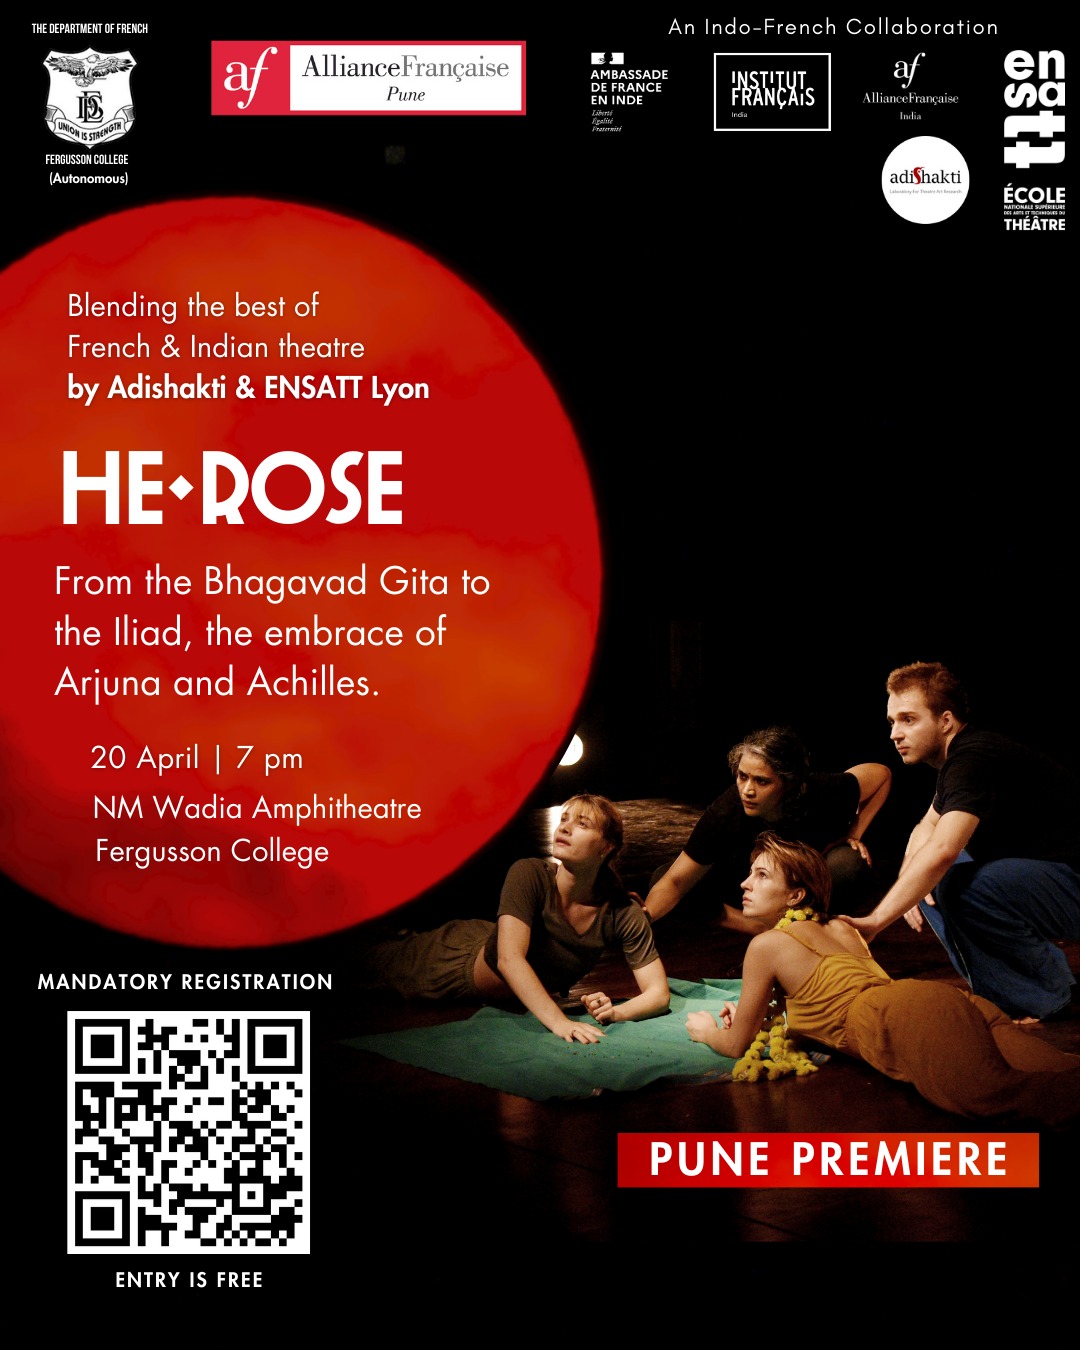 He-Rose Theatrical Play